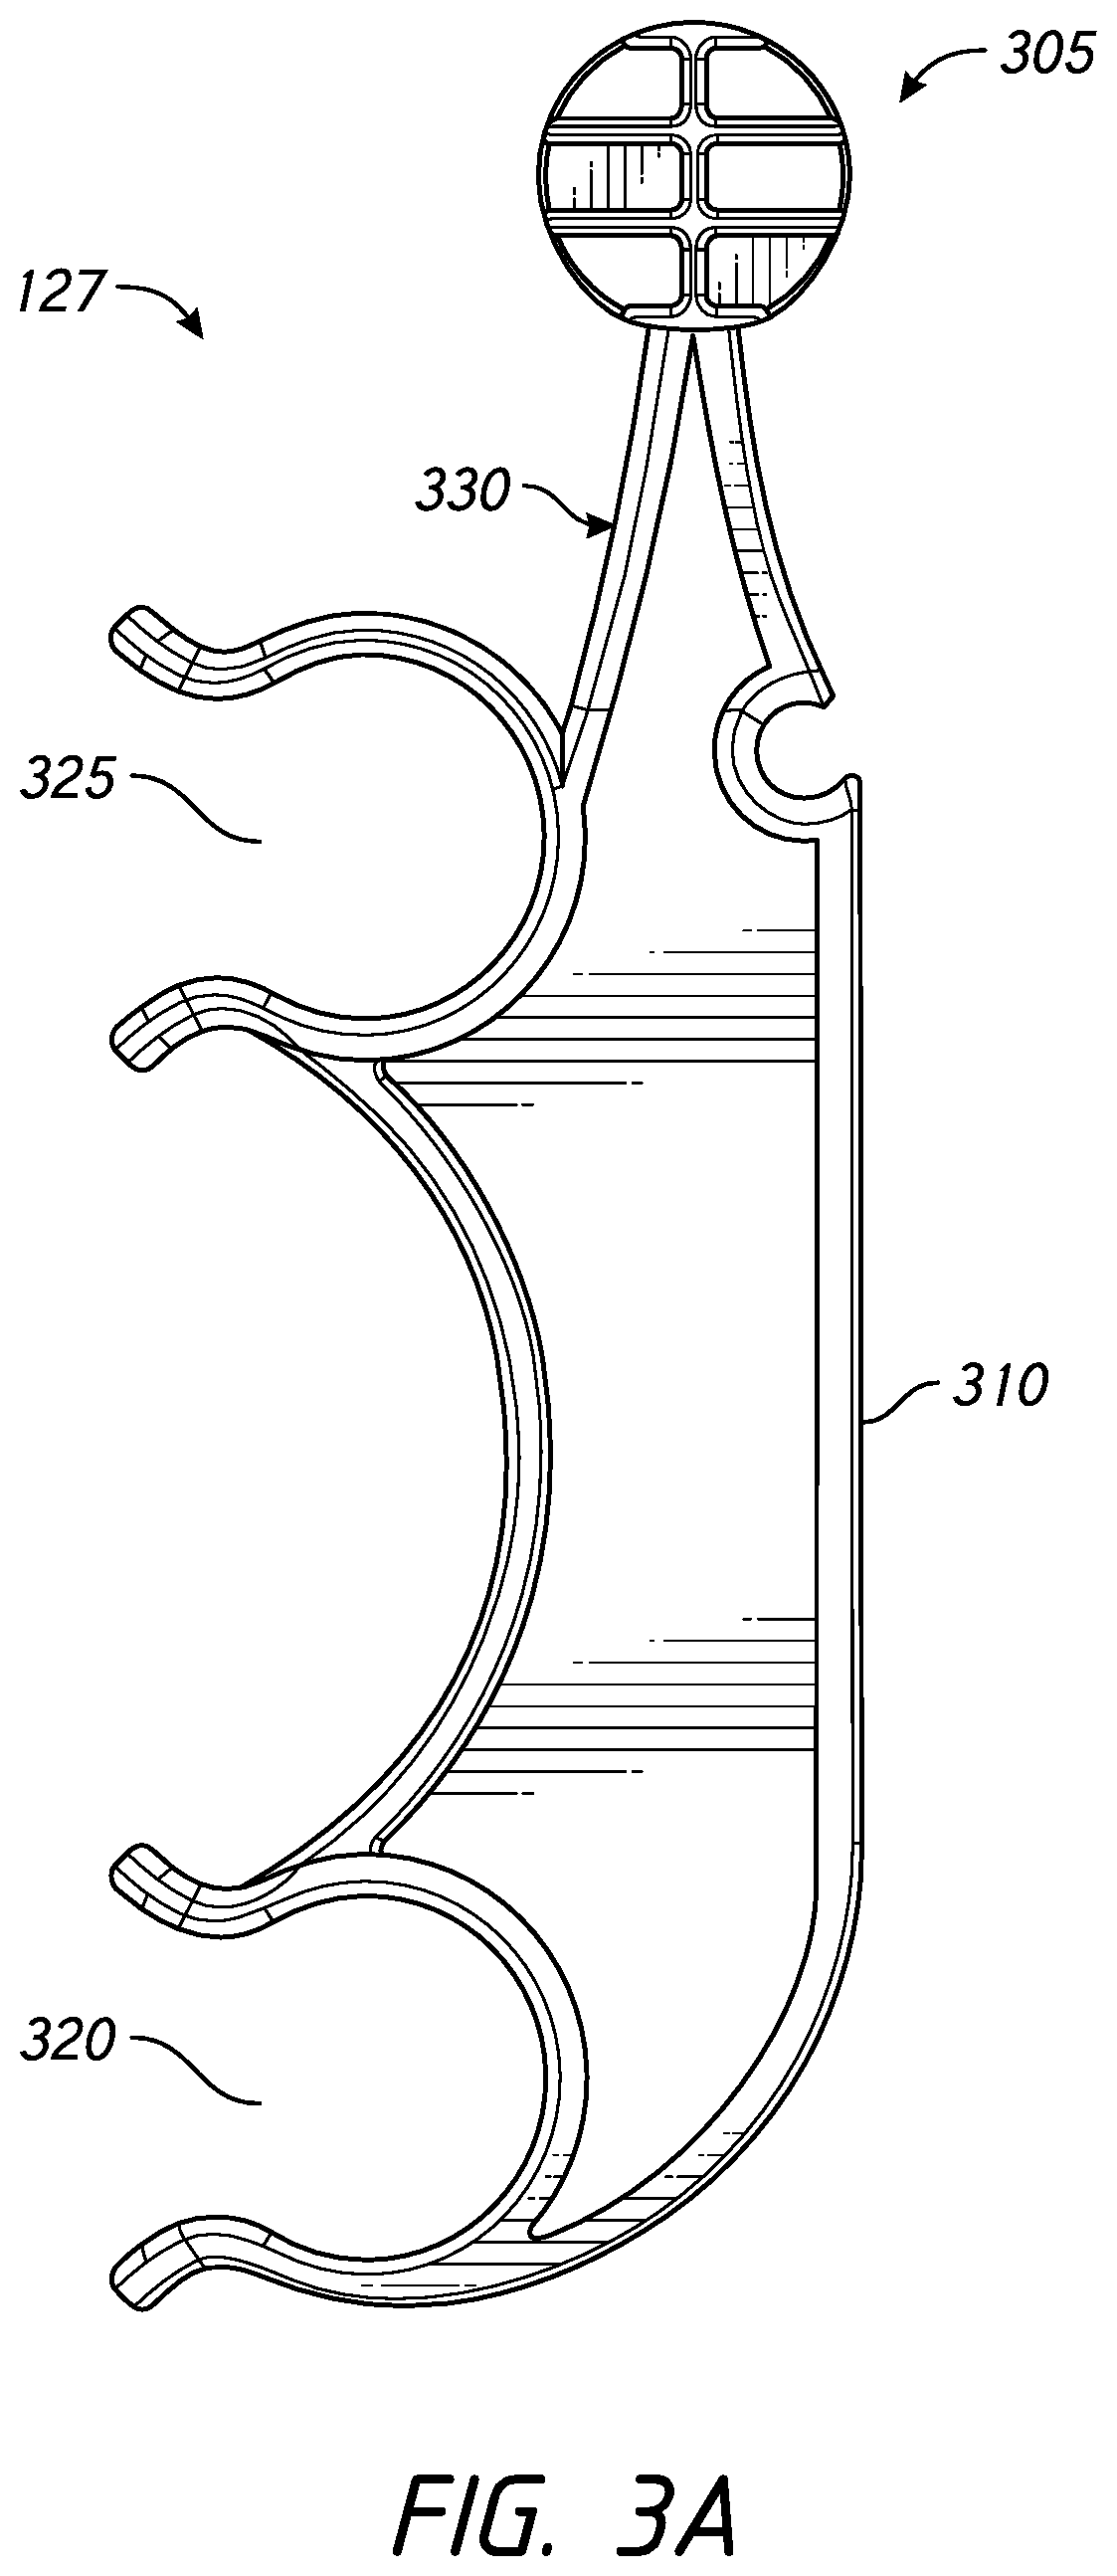 Connectors for respiratory assistance systems